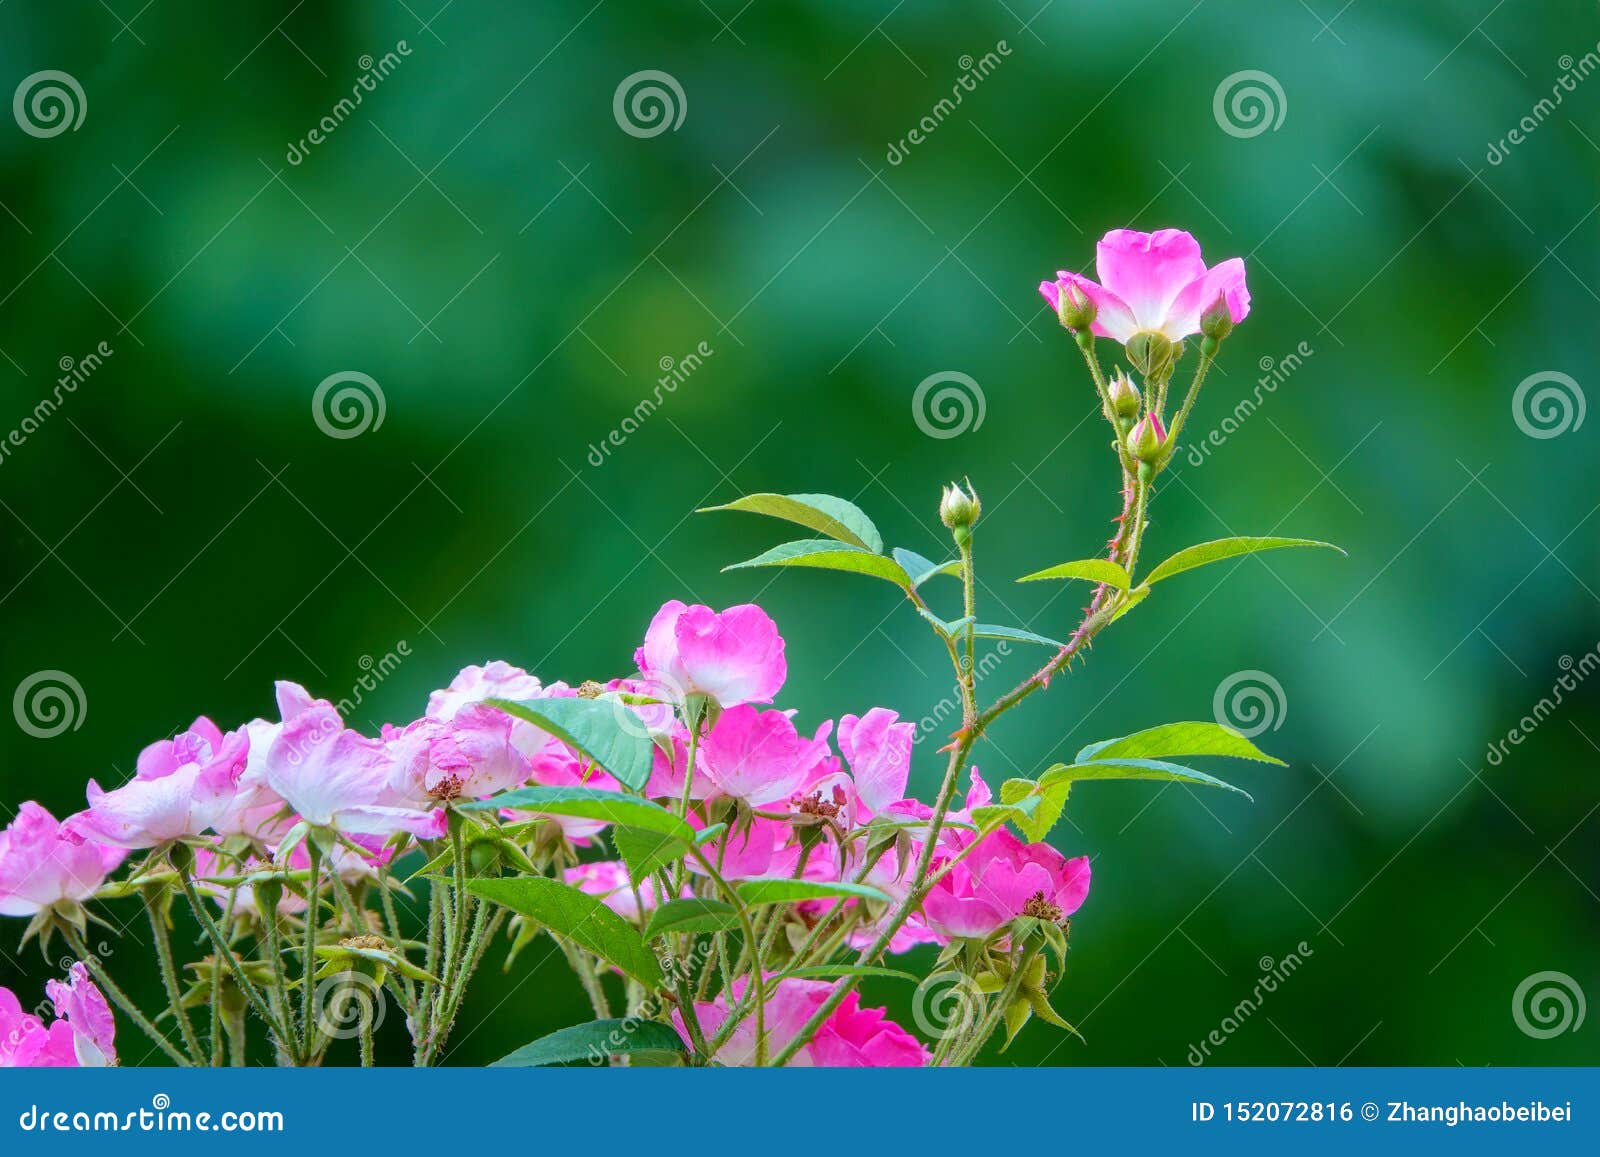 China rose stock photo. Image of color, plant, colorful - 152072816